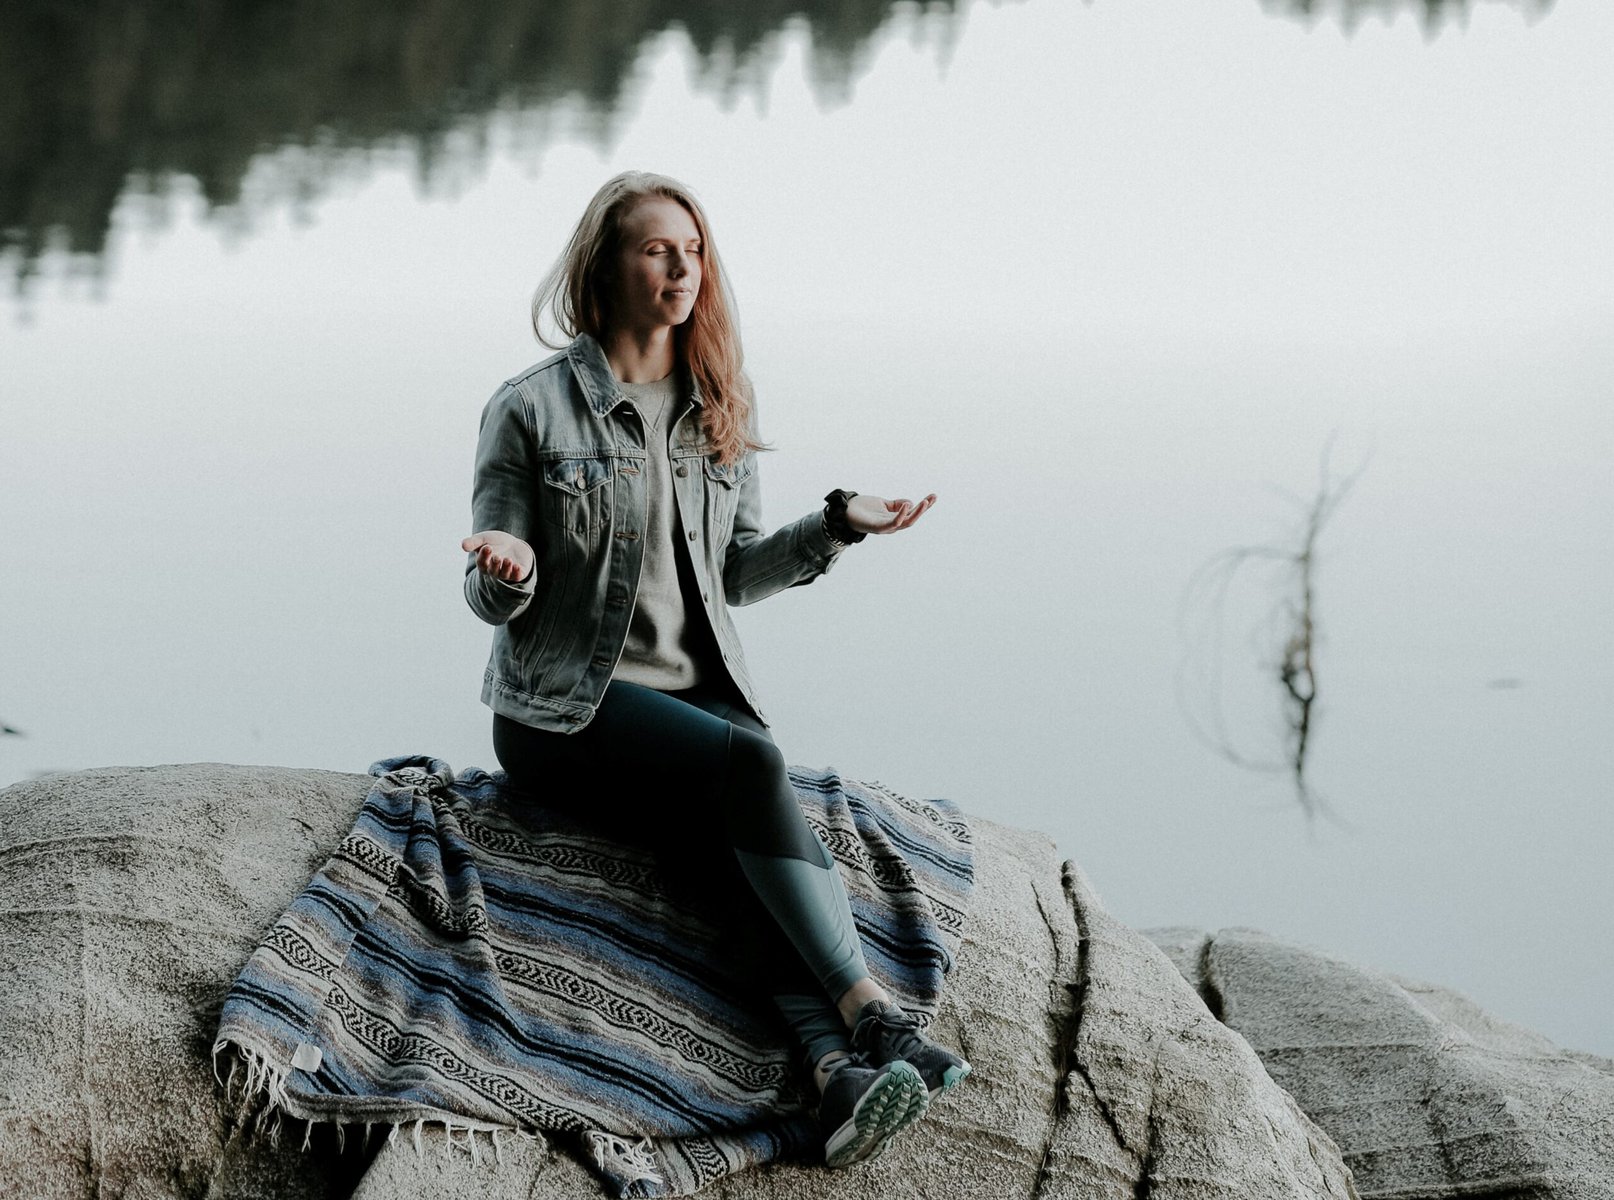 8 Meaningful Mindfulness Exercises To Improve Your Mental Health